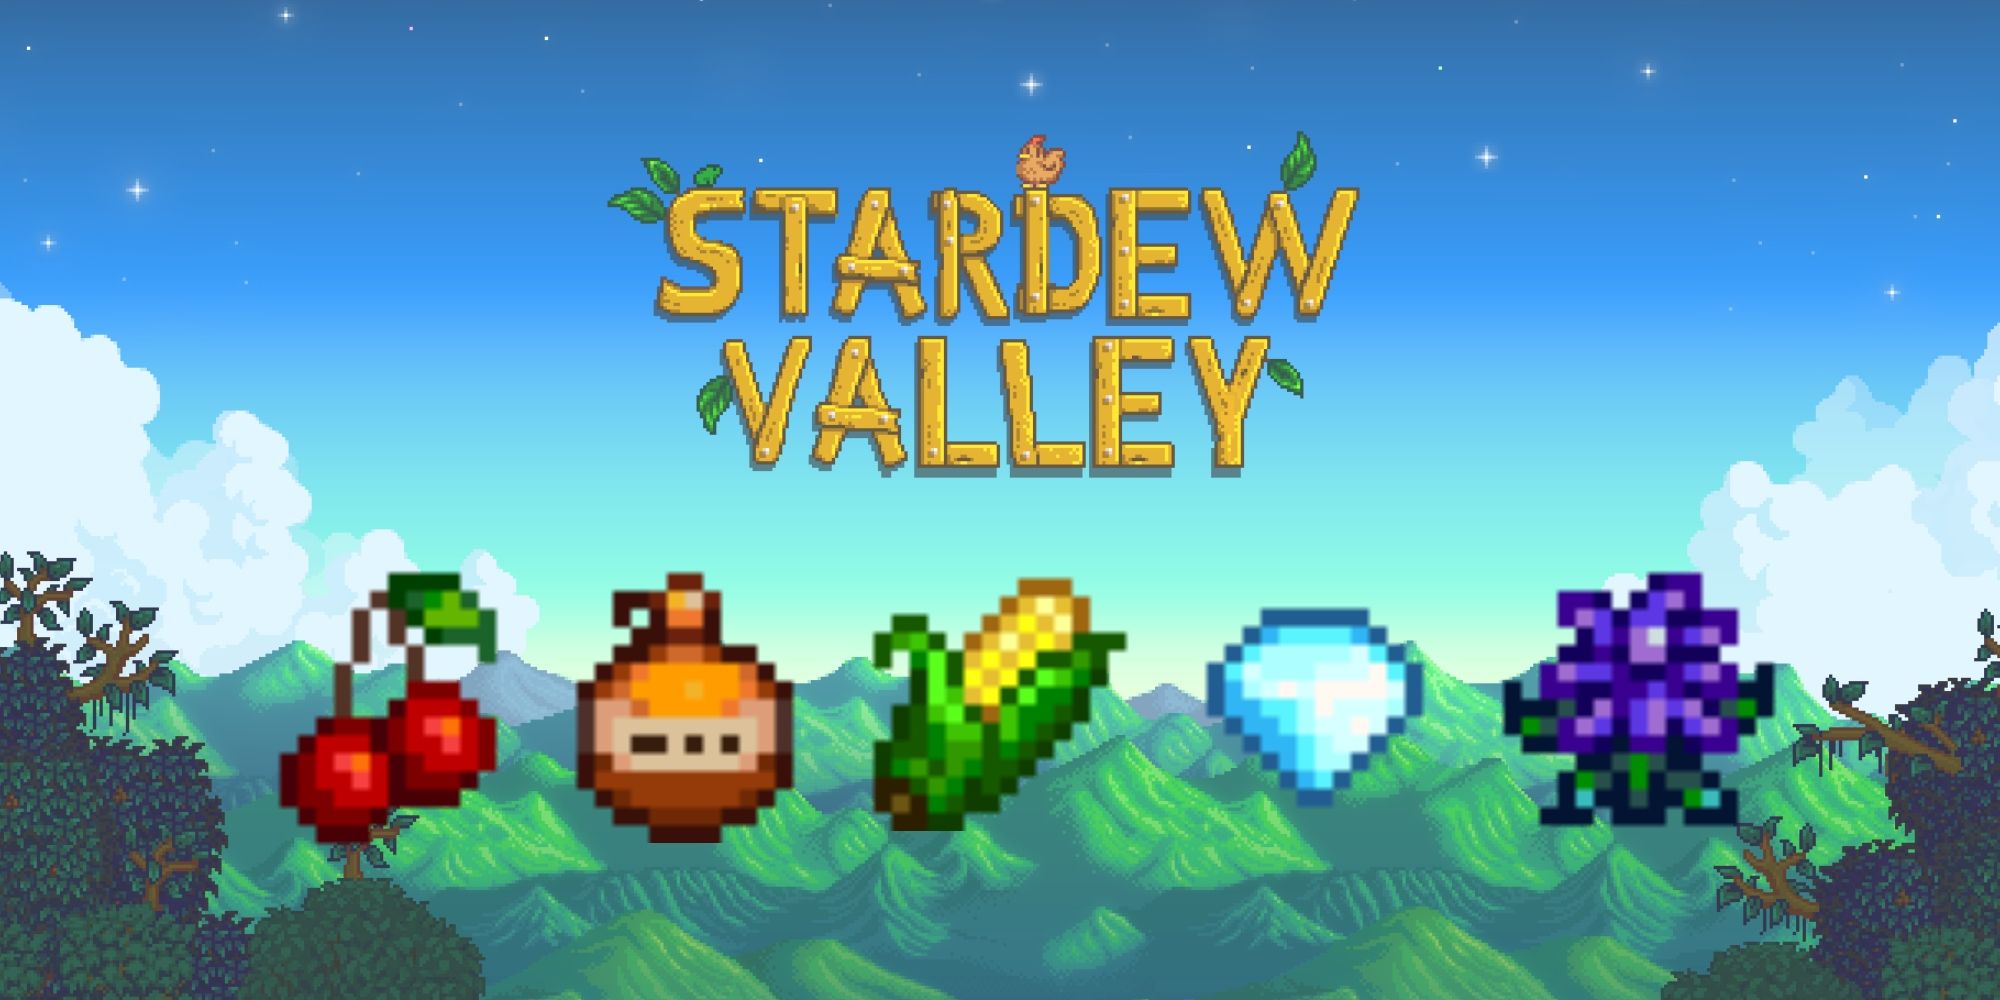 Cherry, Maple Syrup, Corn, Diamond, and Crocus, some Universally liked items in Stardew Valley